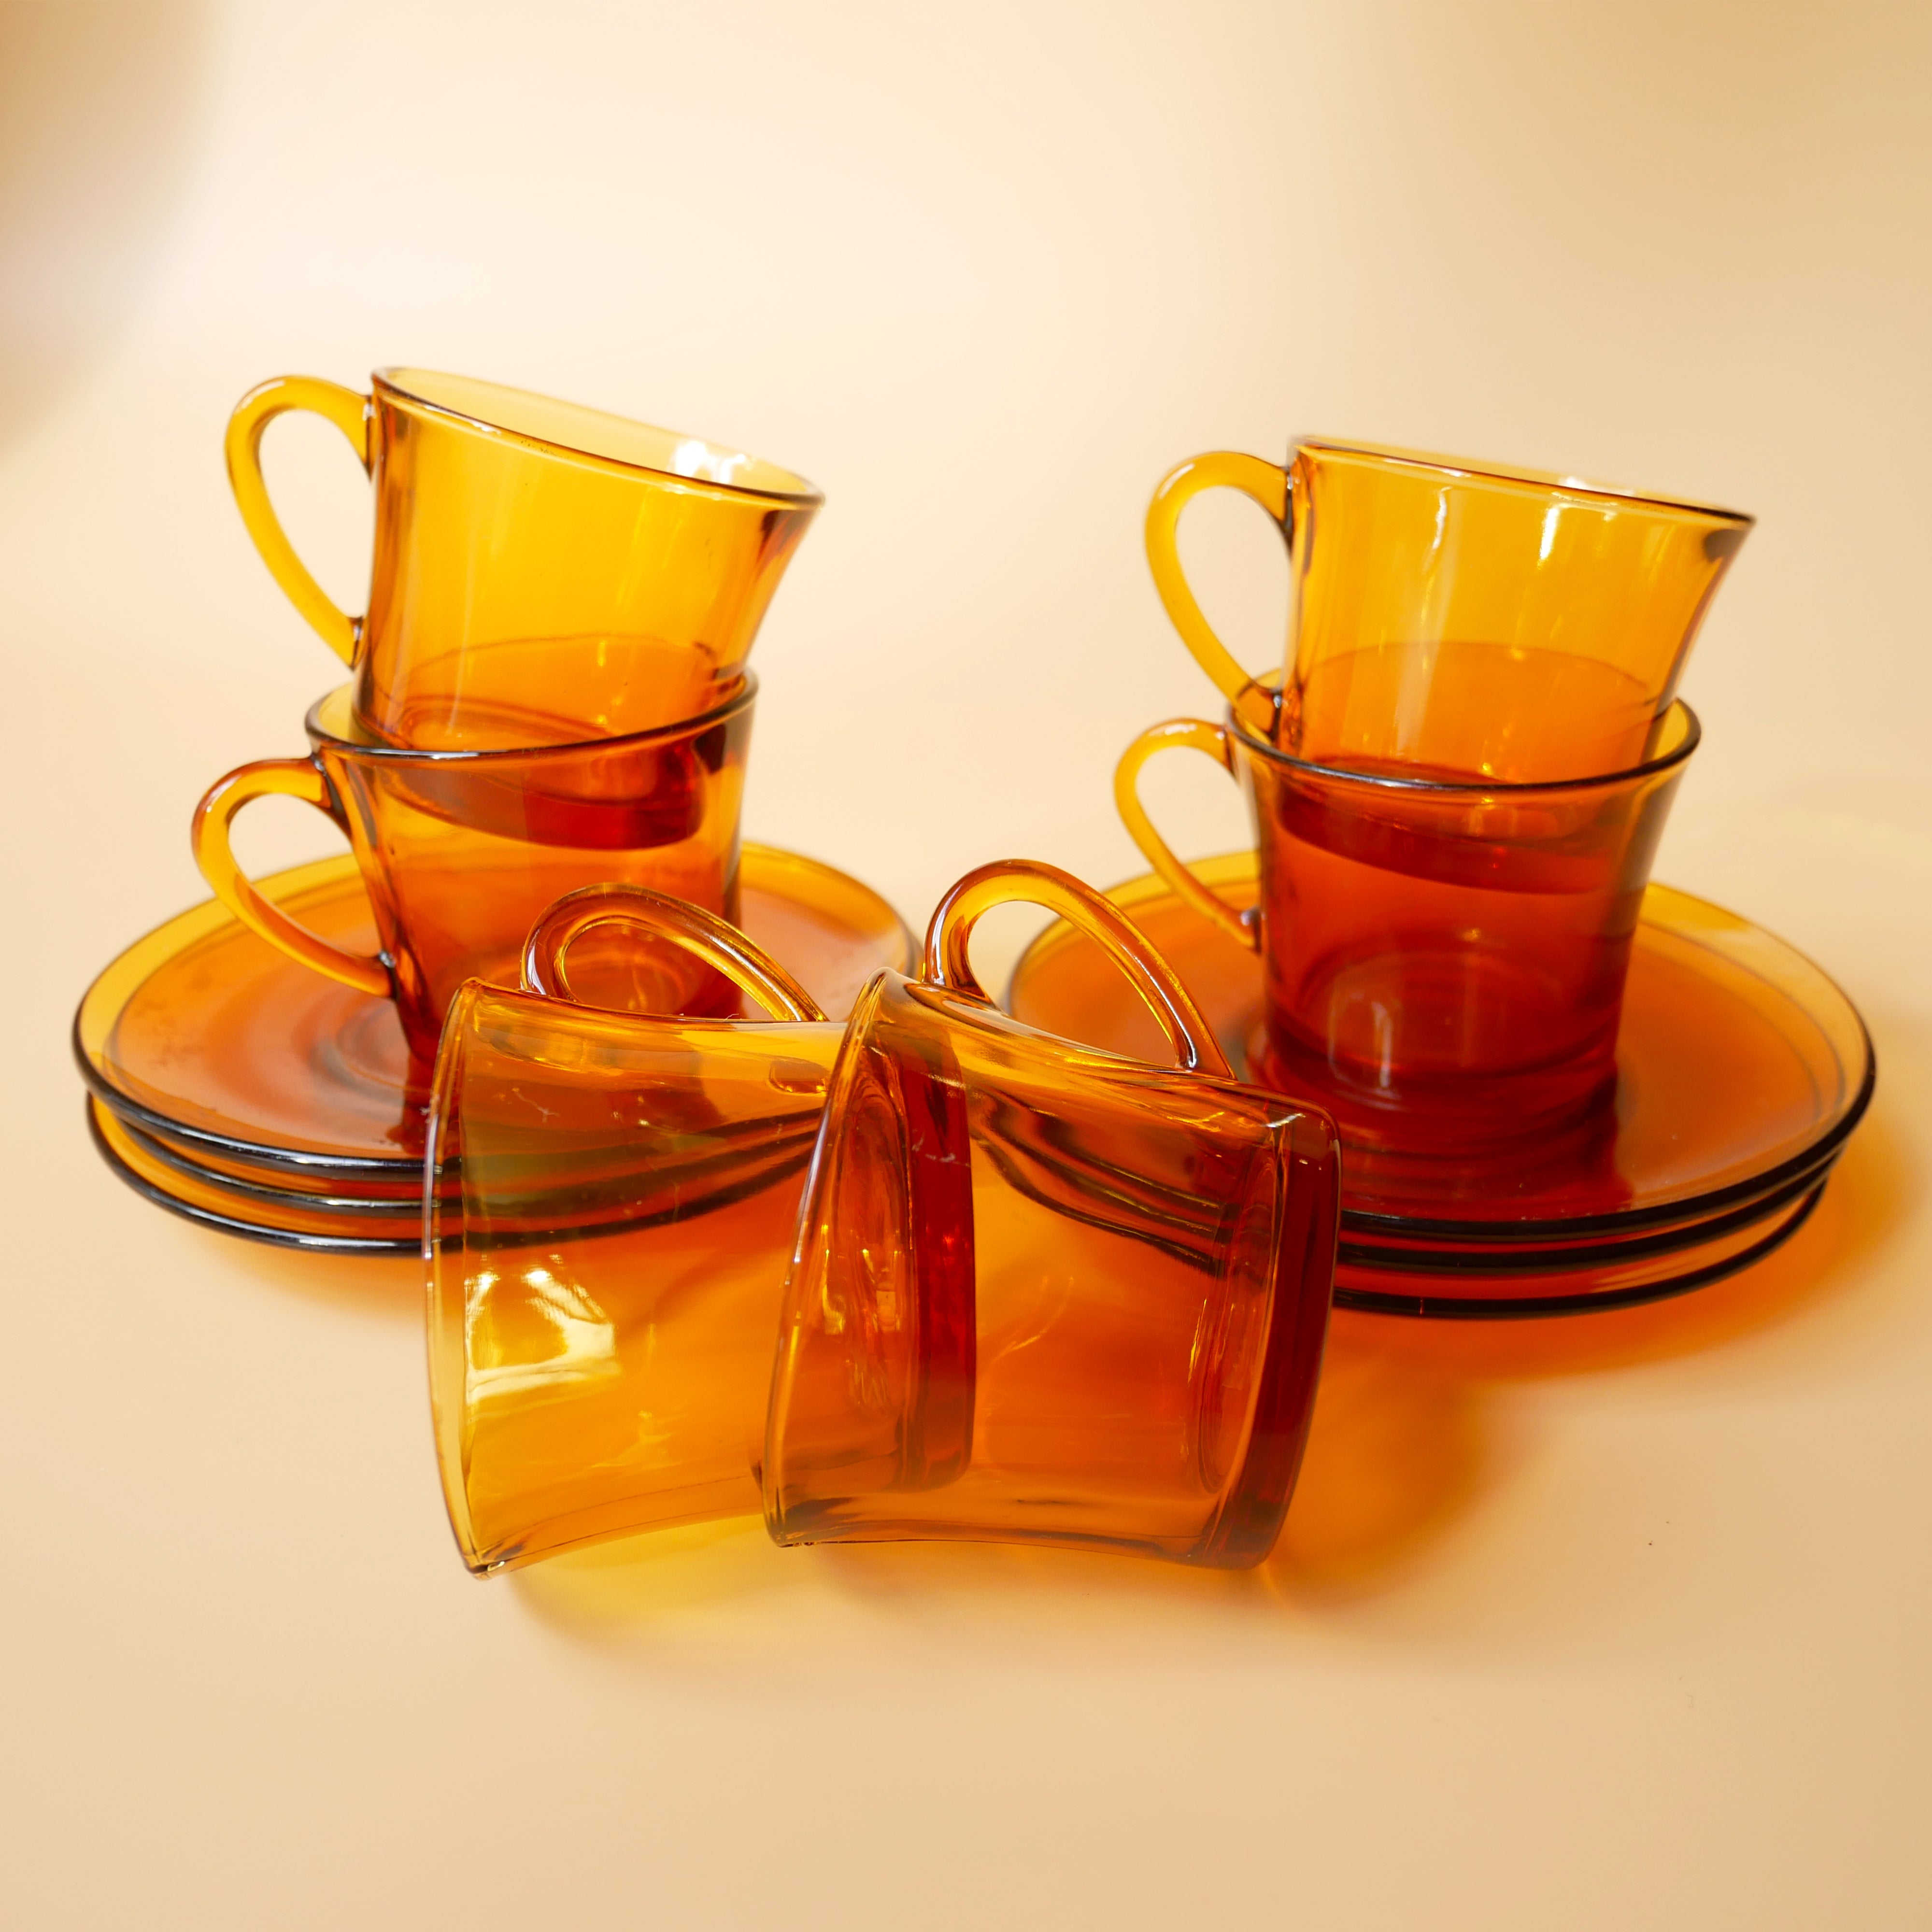 1970s FRENCH SET OF 6 AMBER GLASS ESPRESSO CUP AND SAUCER